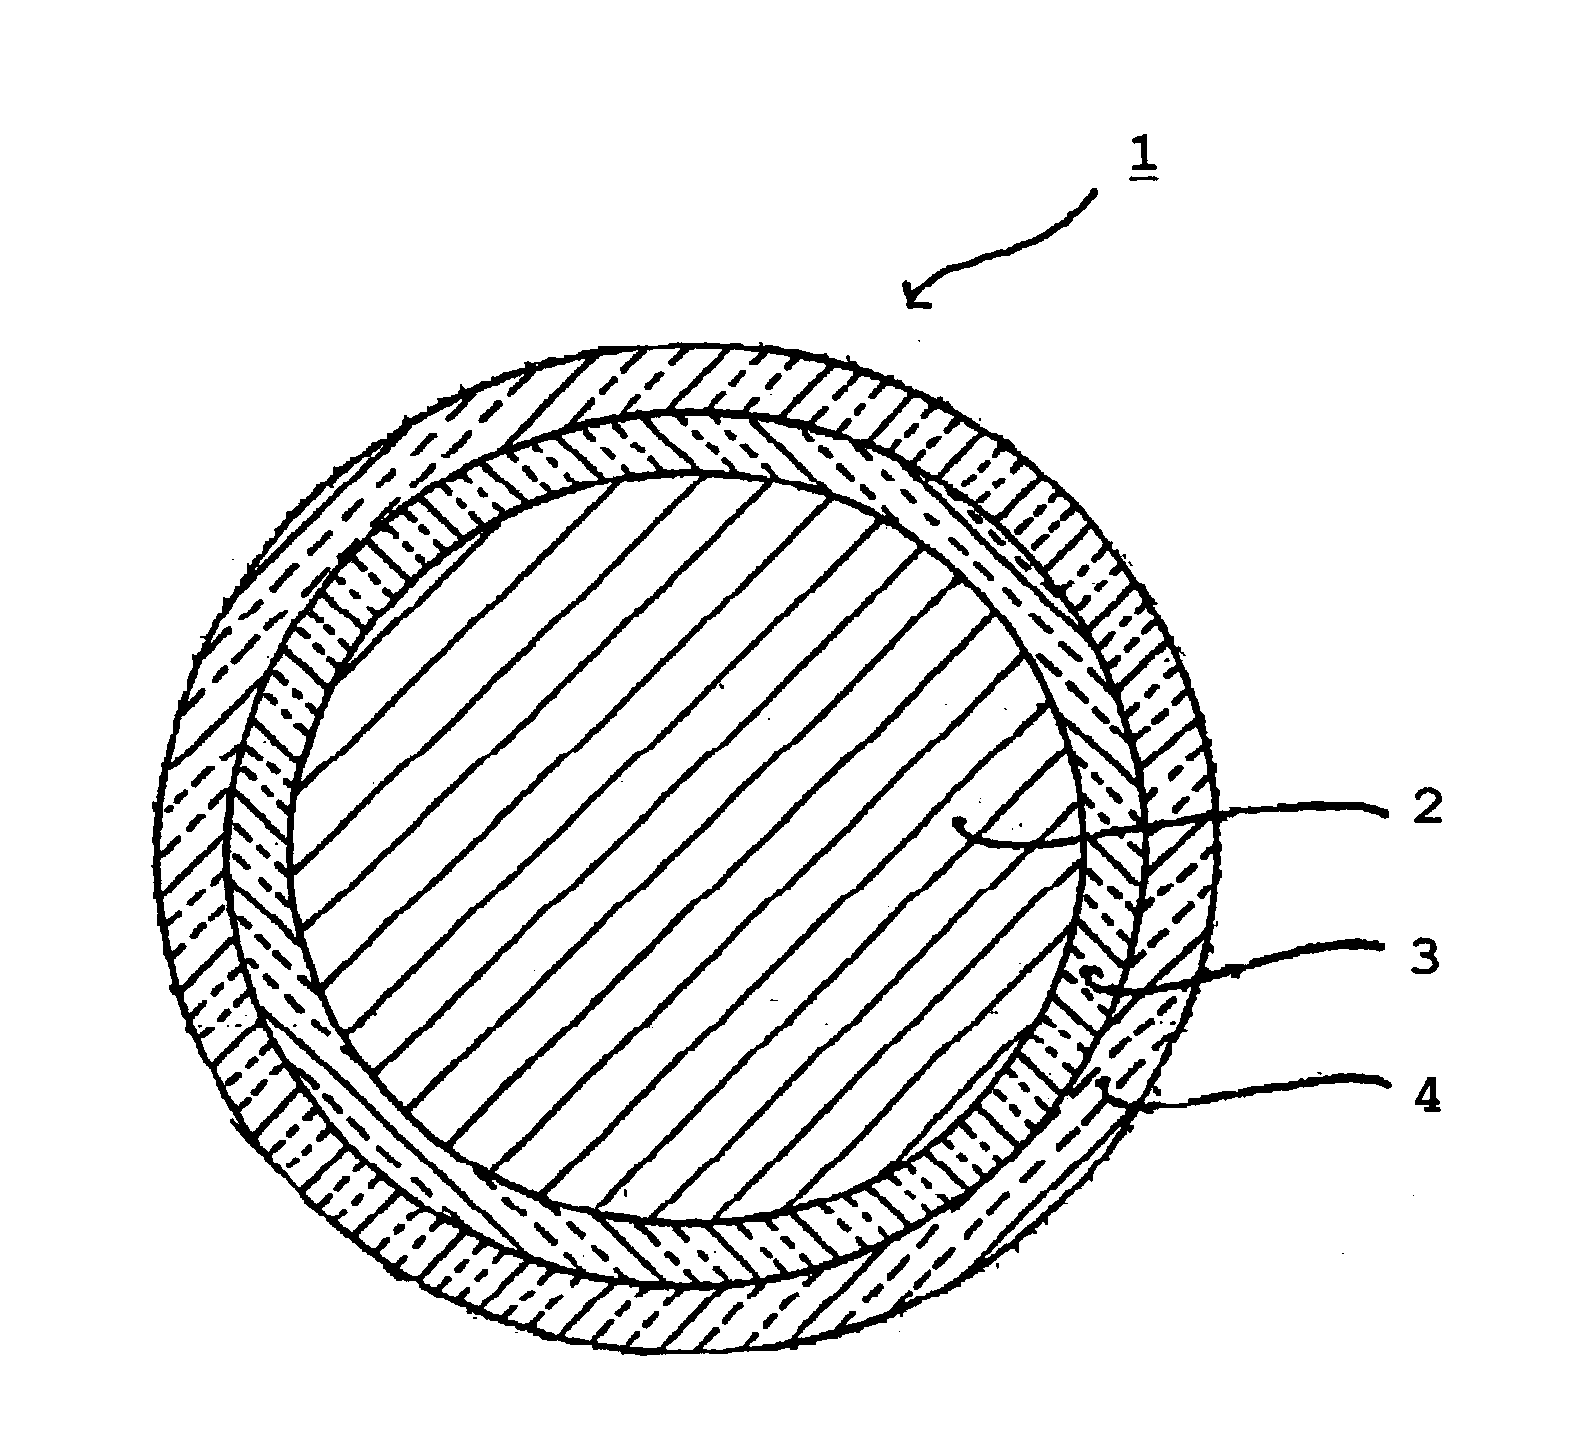 Method of manufacturing an enamel having a low coefficient of friction, and an electrical conductor coated in such an enamel